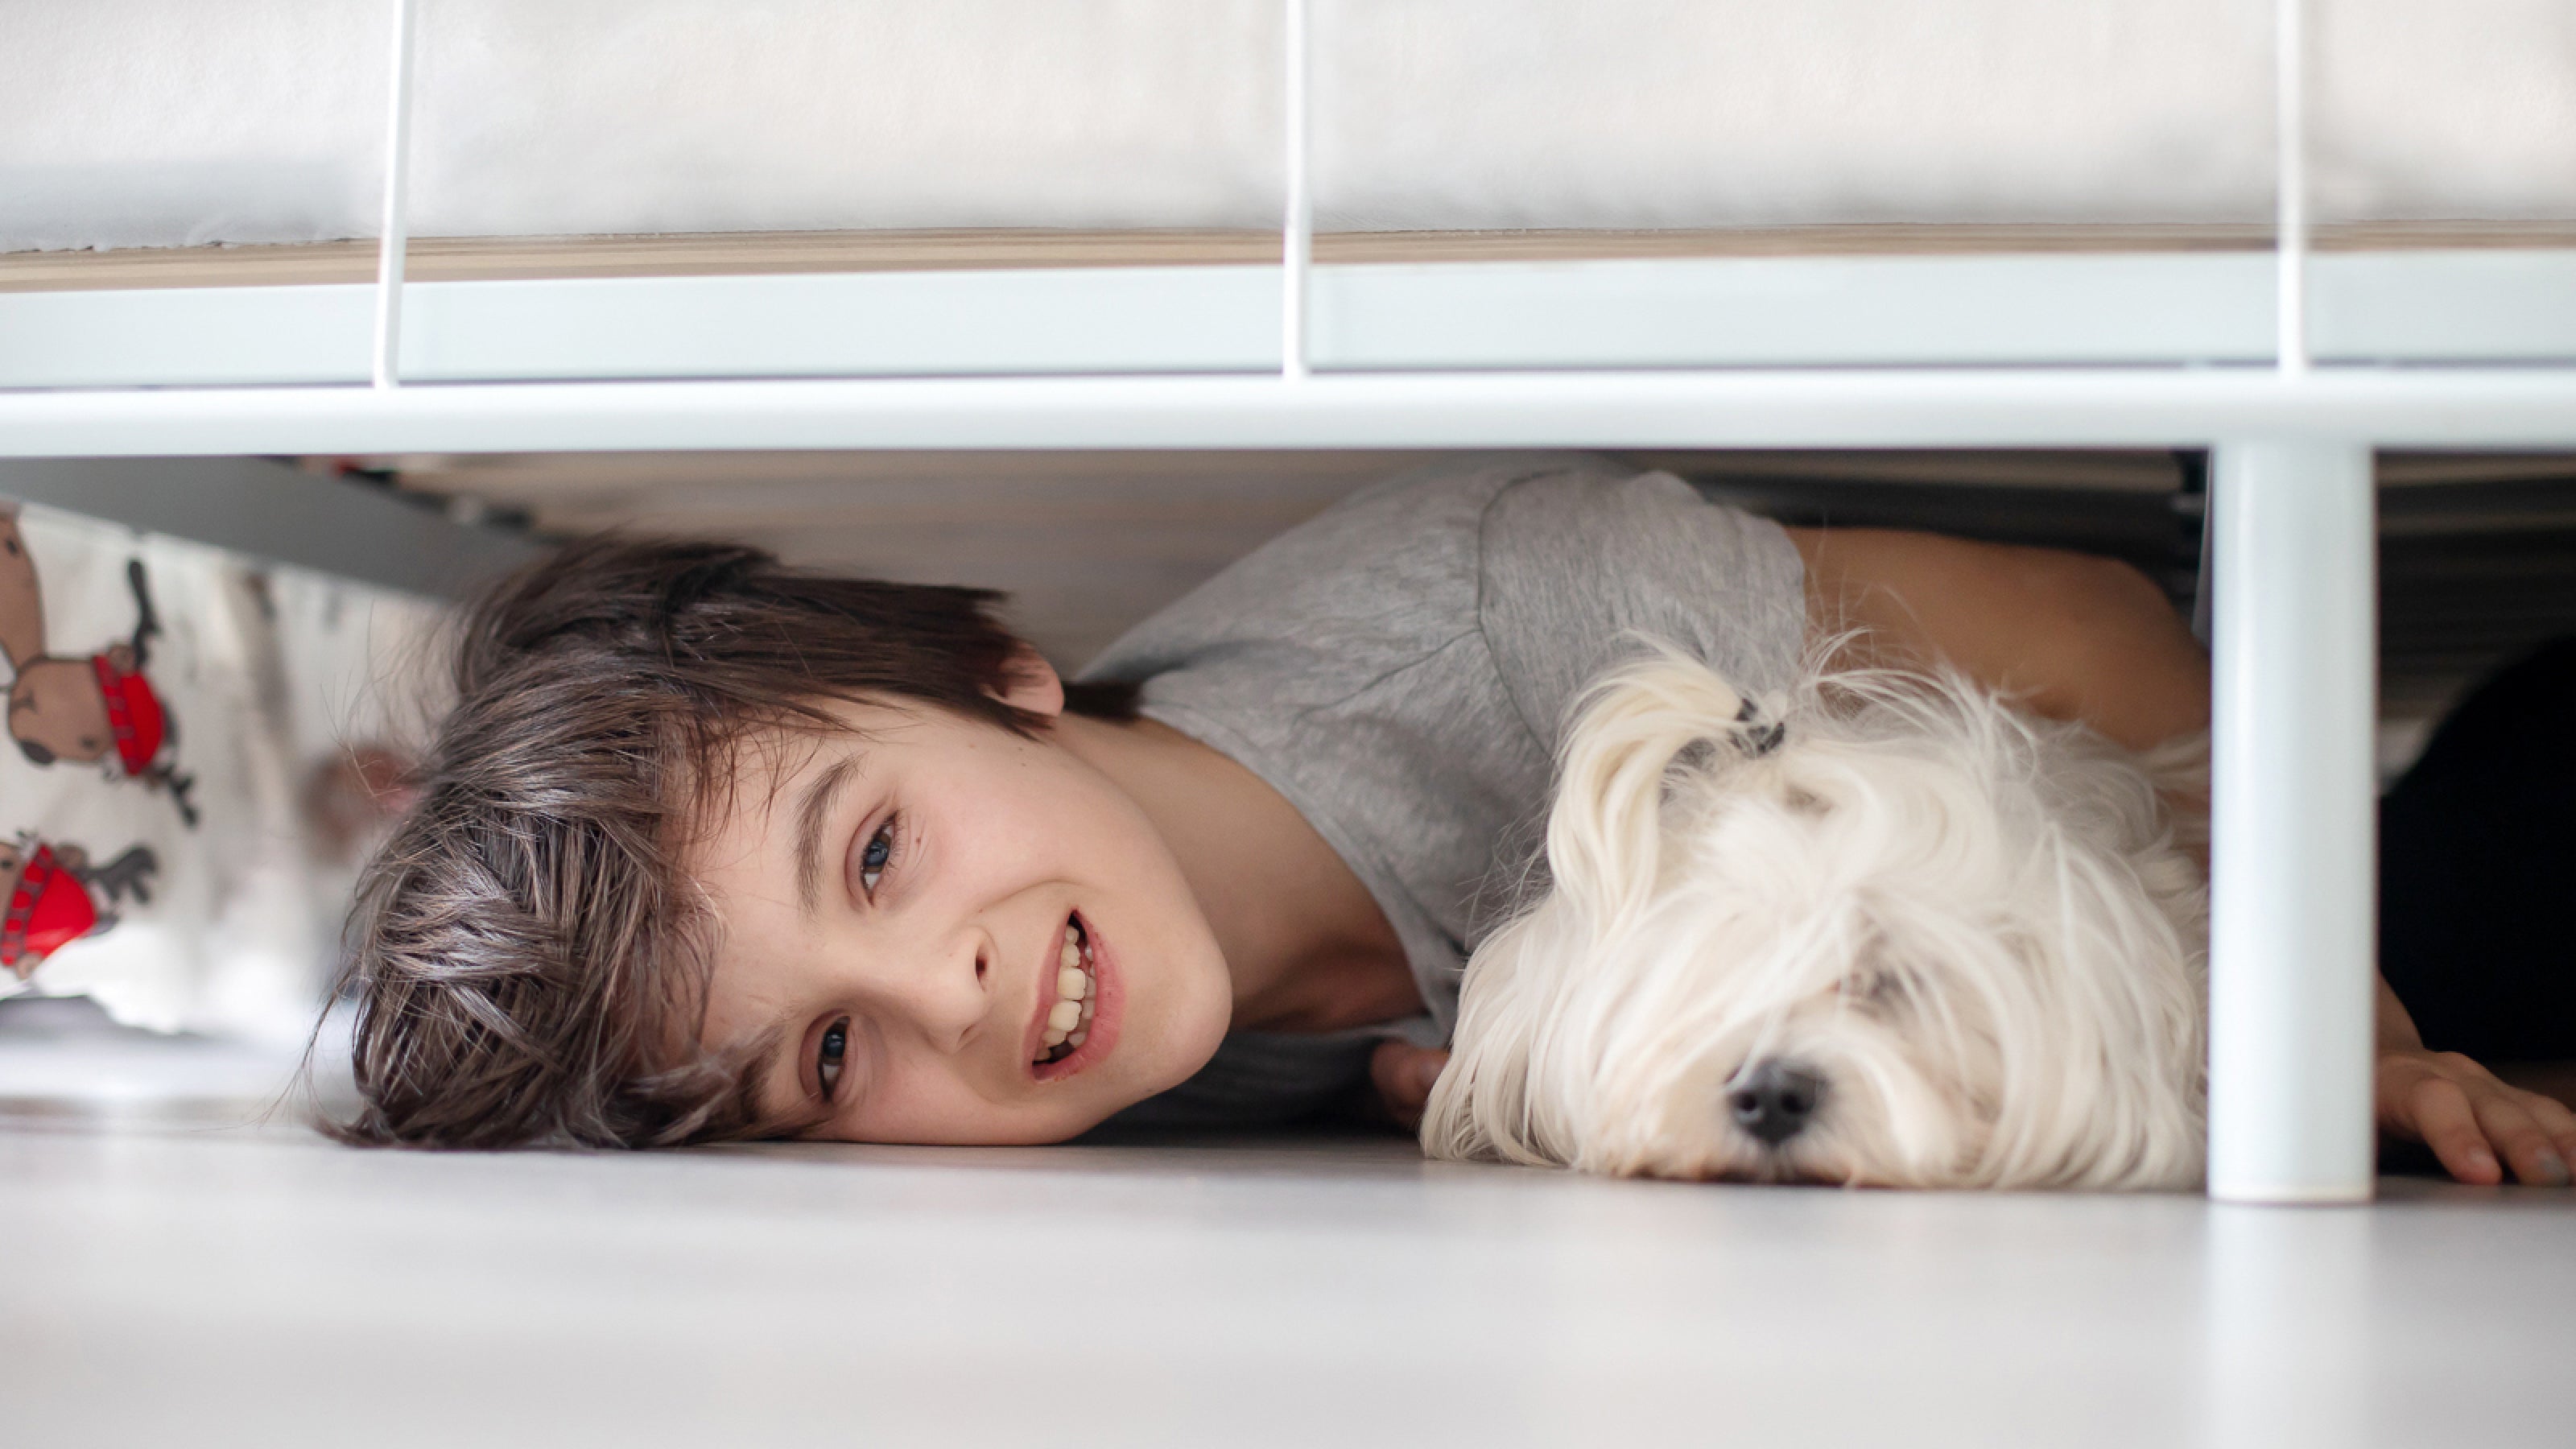 A young boy and white dog with long hair hide under a bed